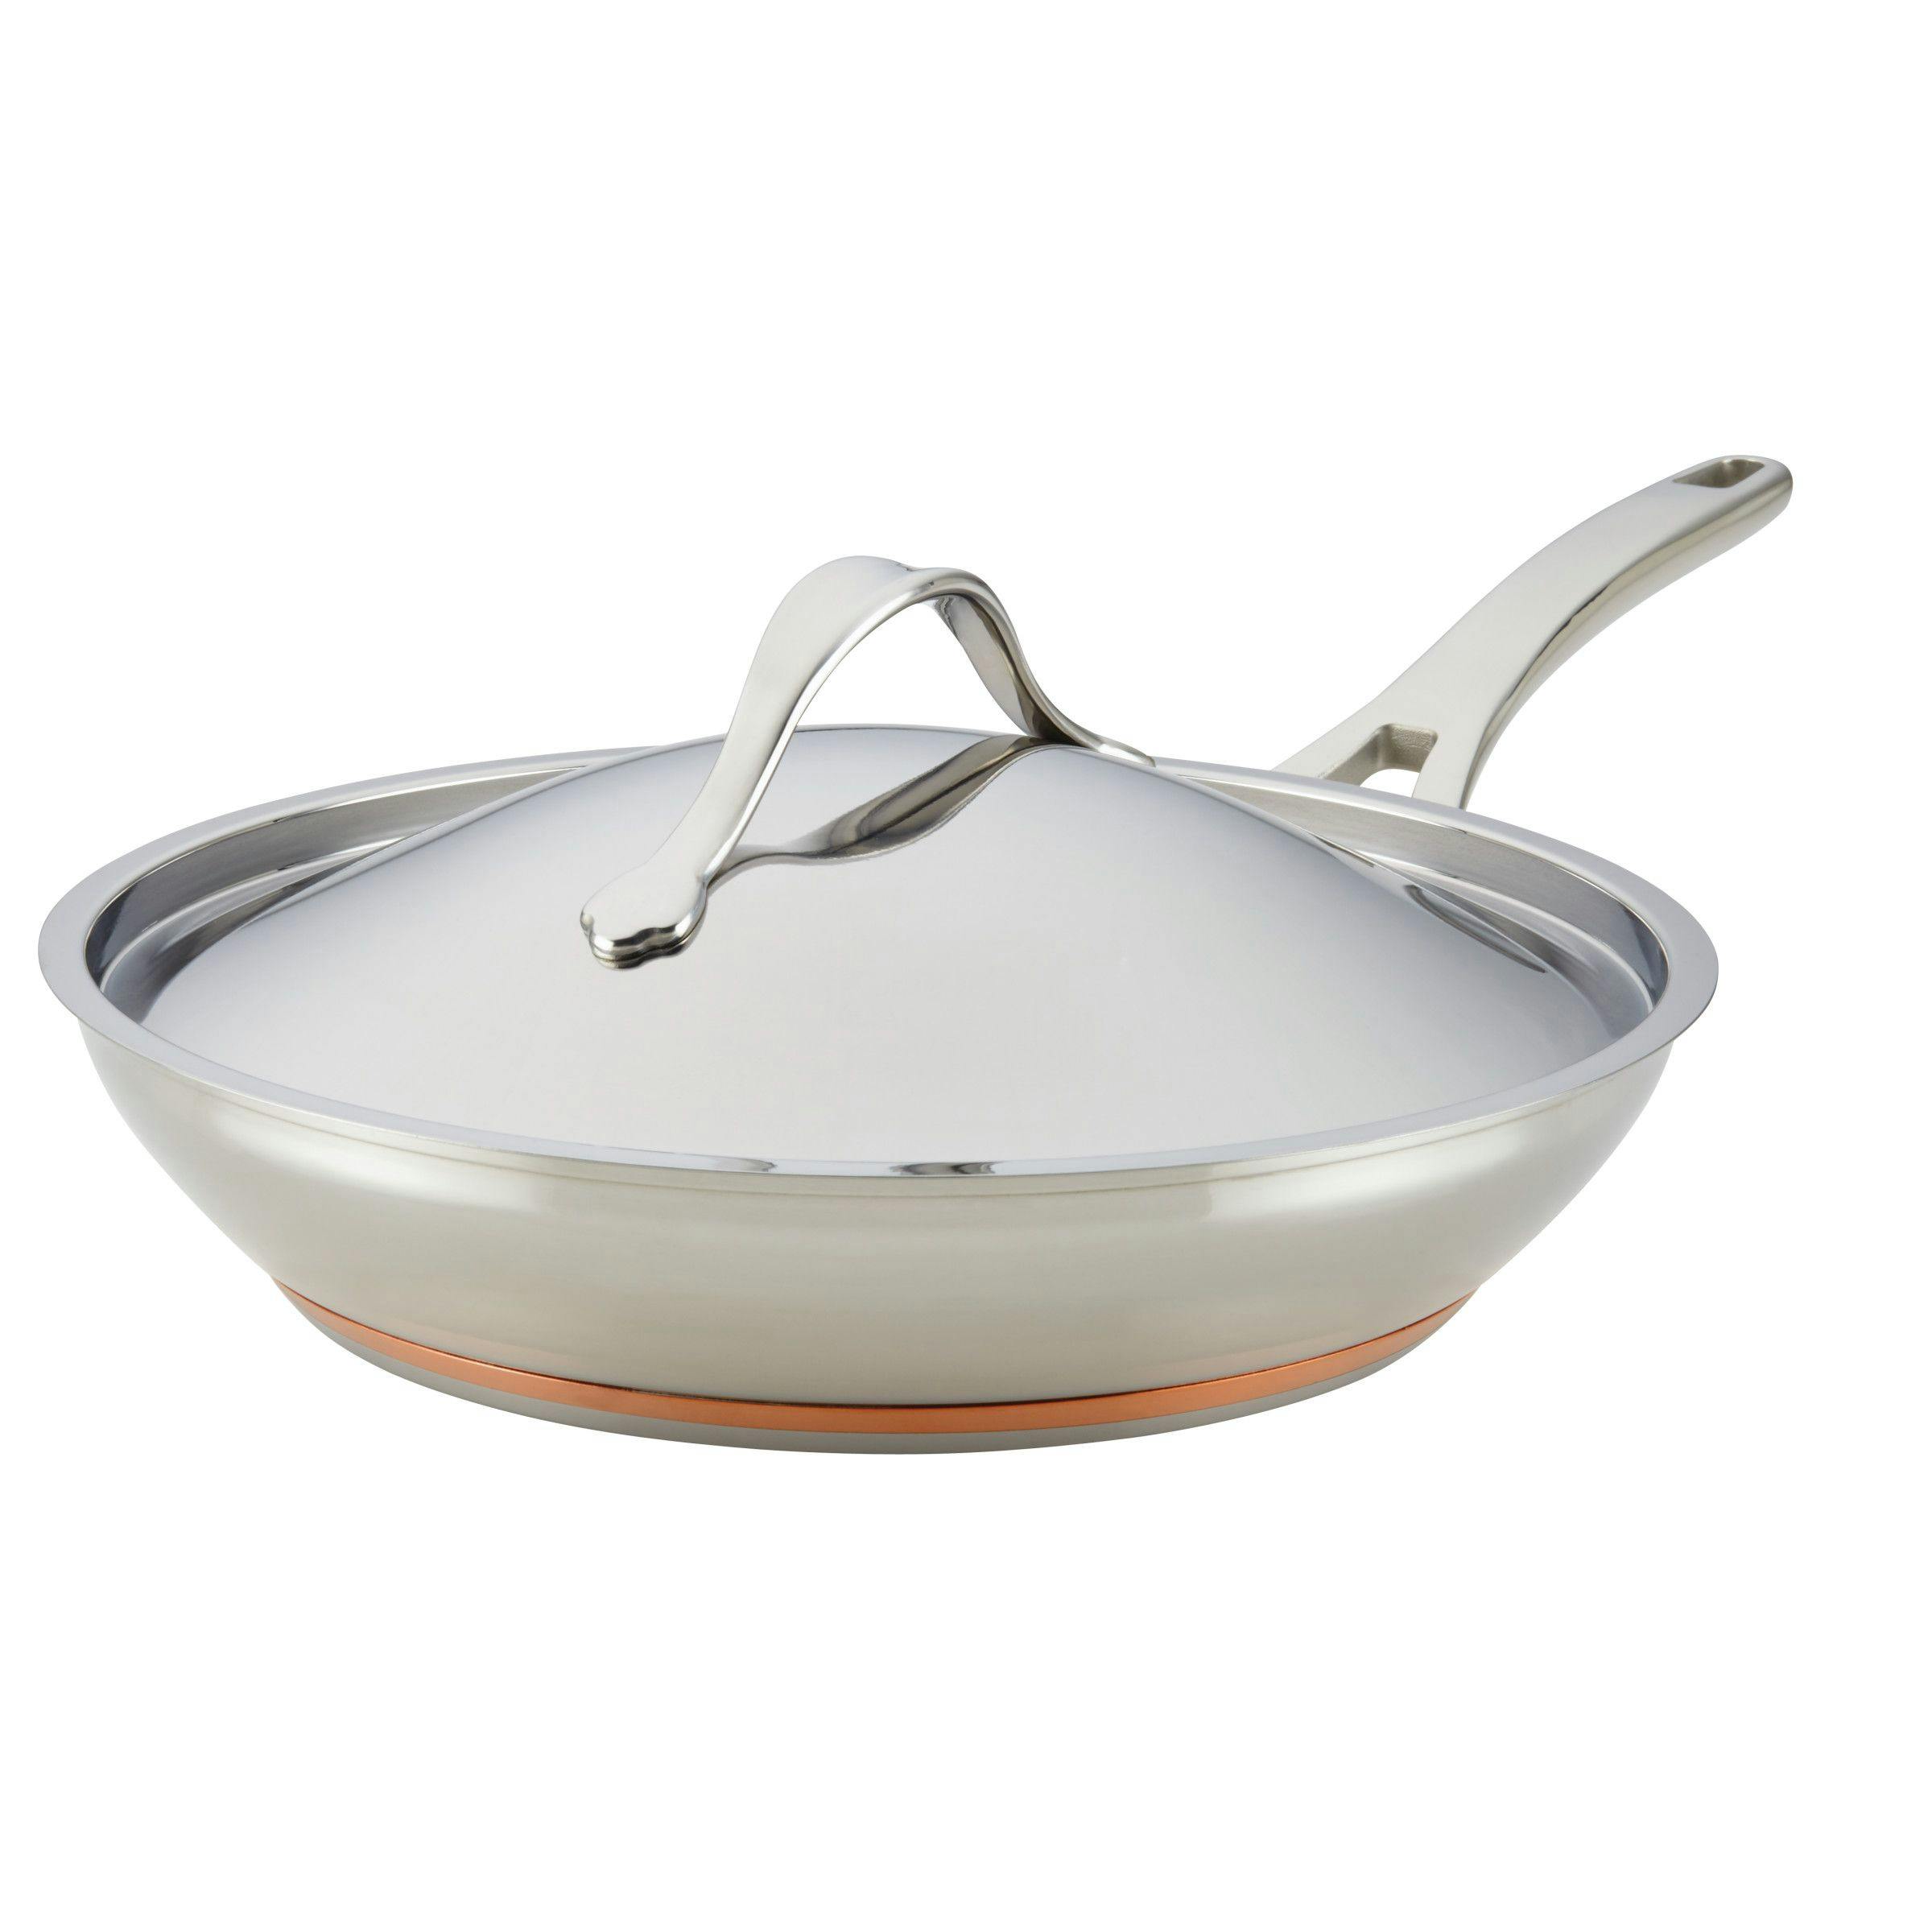 Anolon Nouvelle Copper Stainless Steel Induction Frying Pan with Lid, 12-Inch, Silver